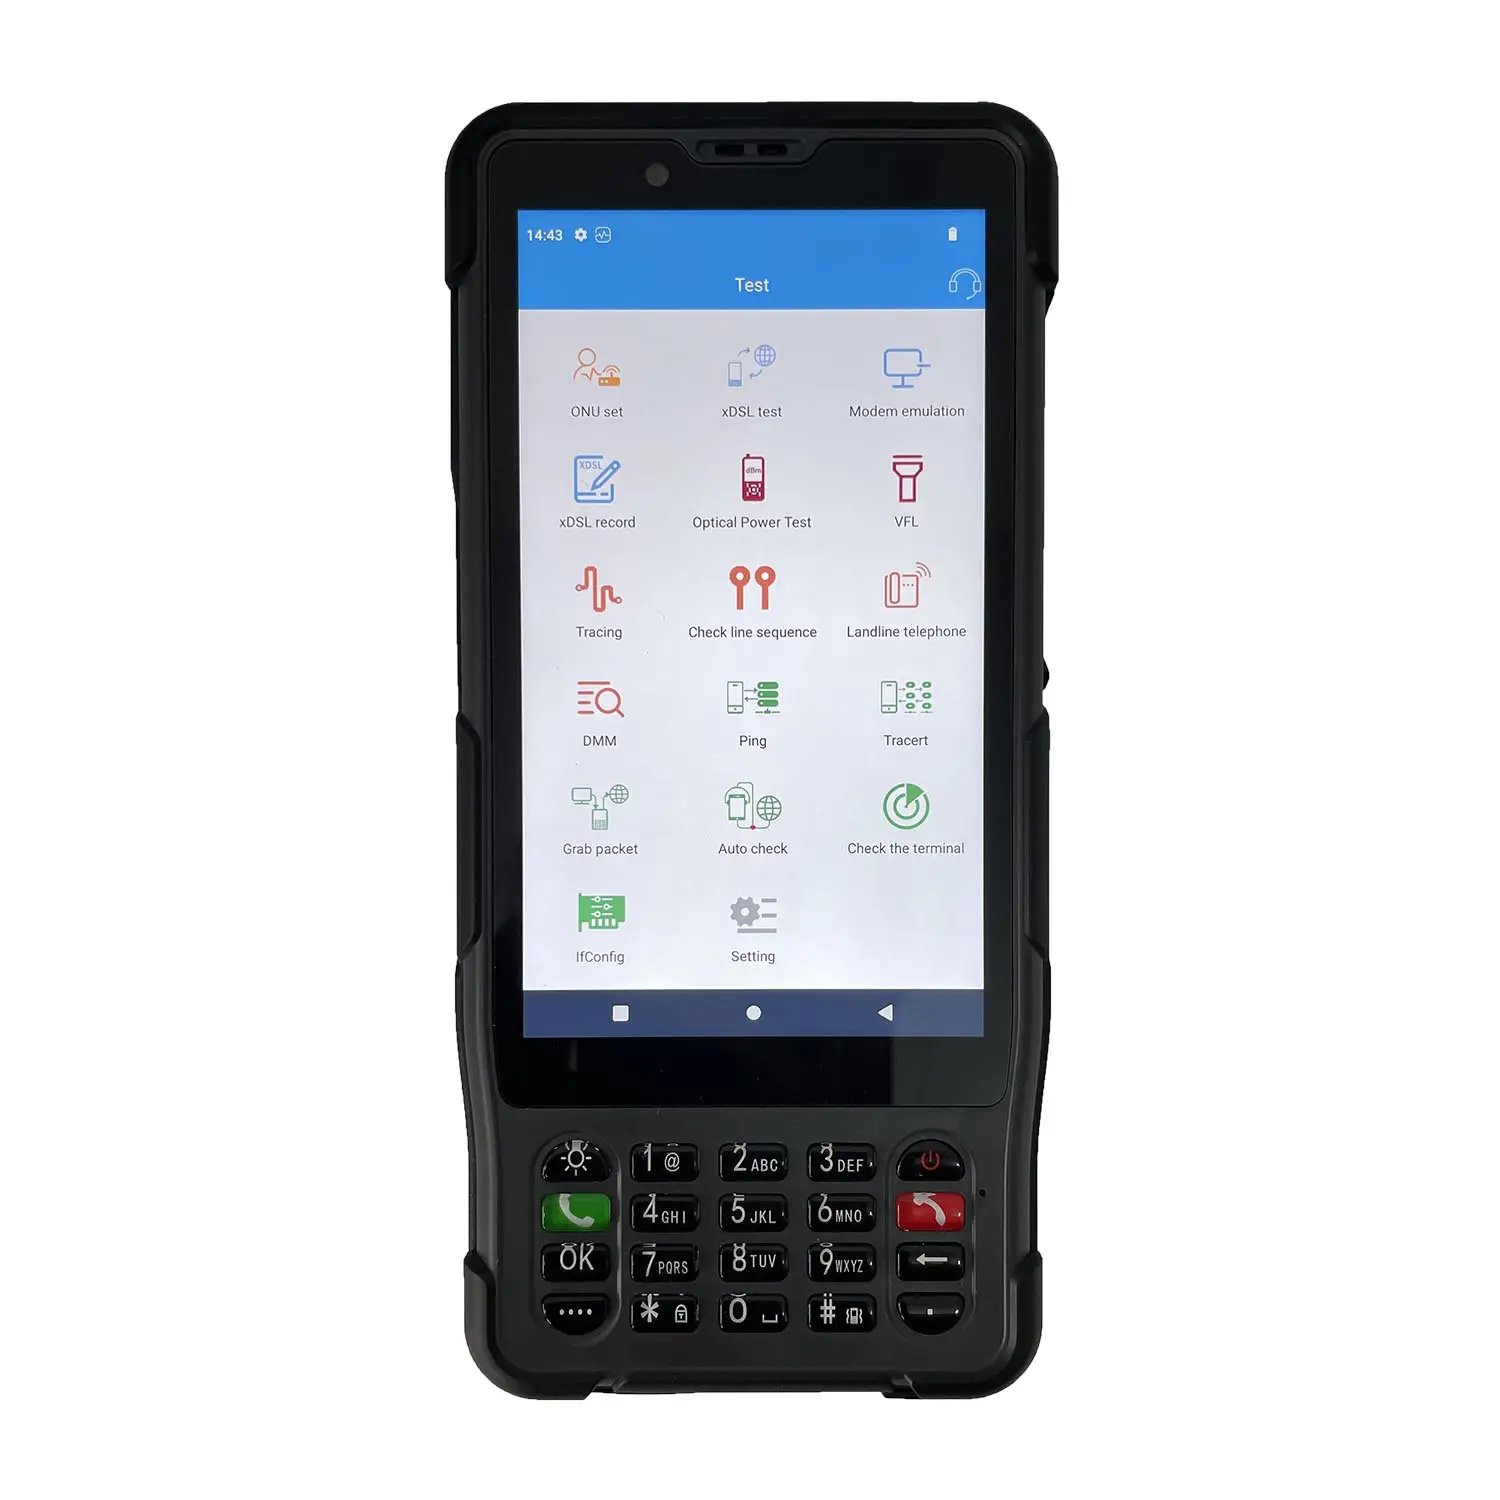 SENTER handheld PDA Telecom tester wifi analysis speedtest xdsl opm vfl cable tracker Android 12 OS